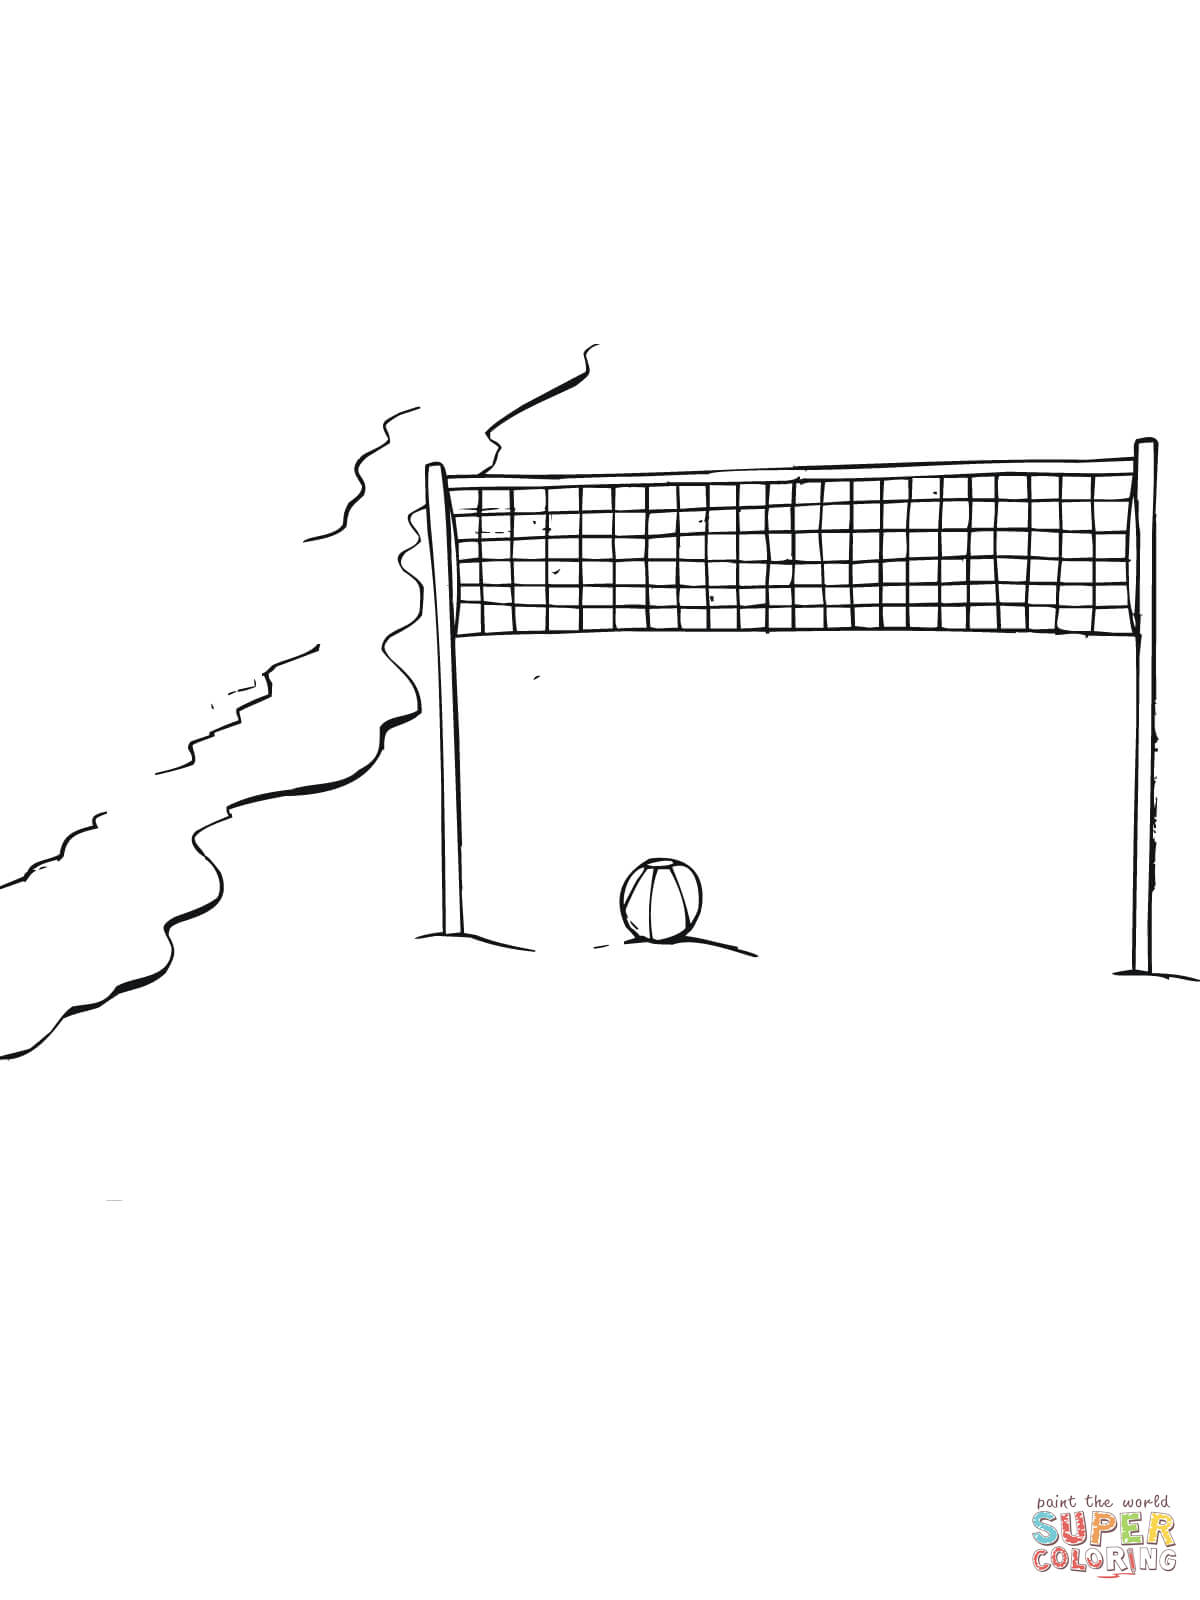 Image #17693 - Coloriage volleyball gratuit